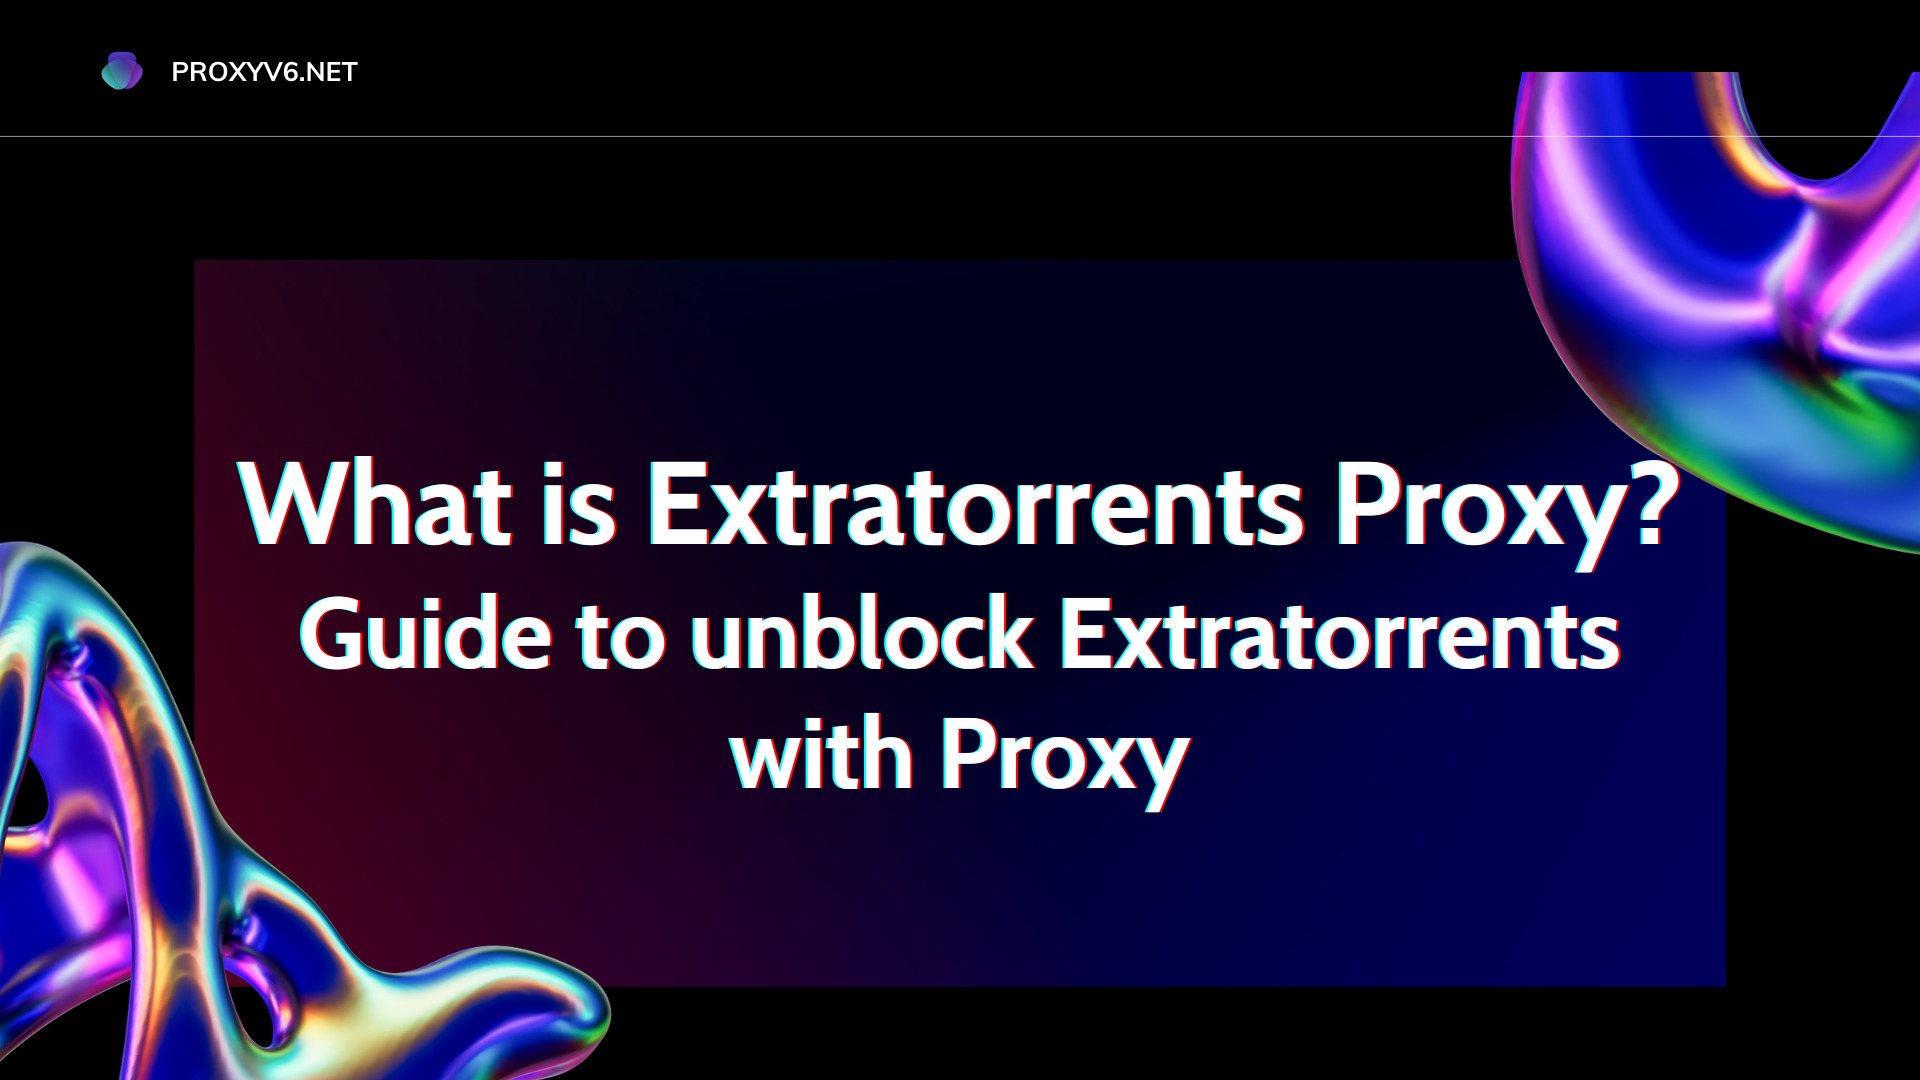 What is Extratorrents Proxy? Guide to unblock Extratorrents with Proxy